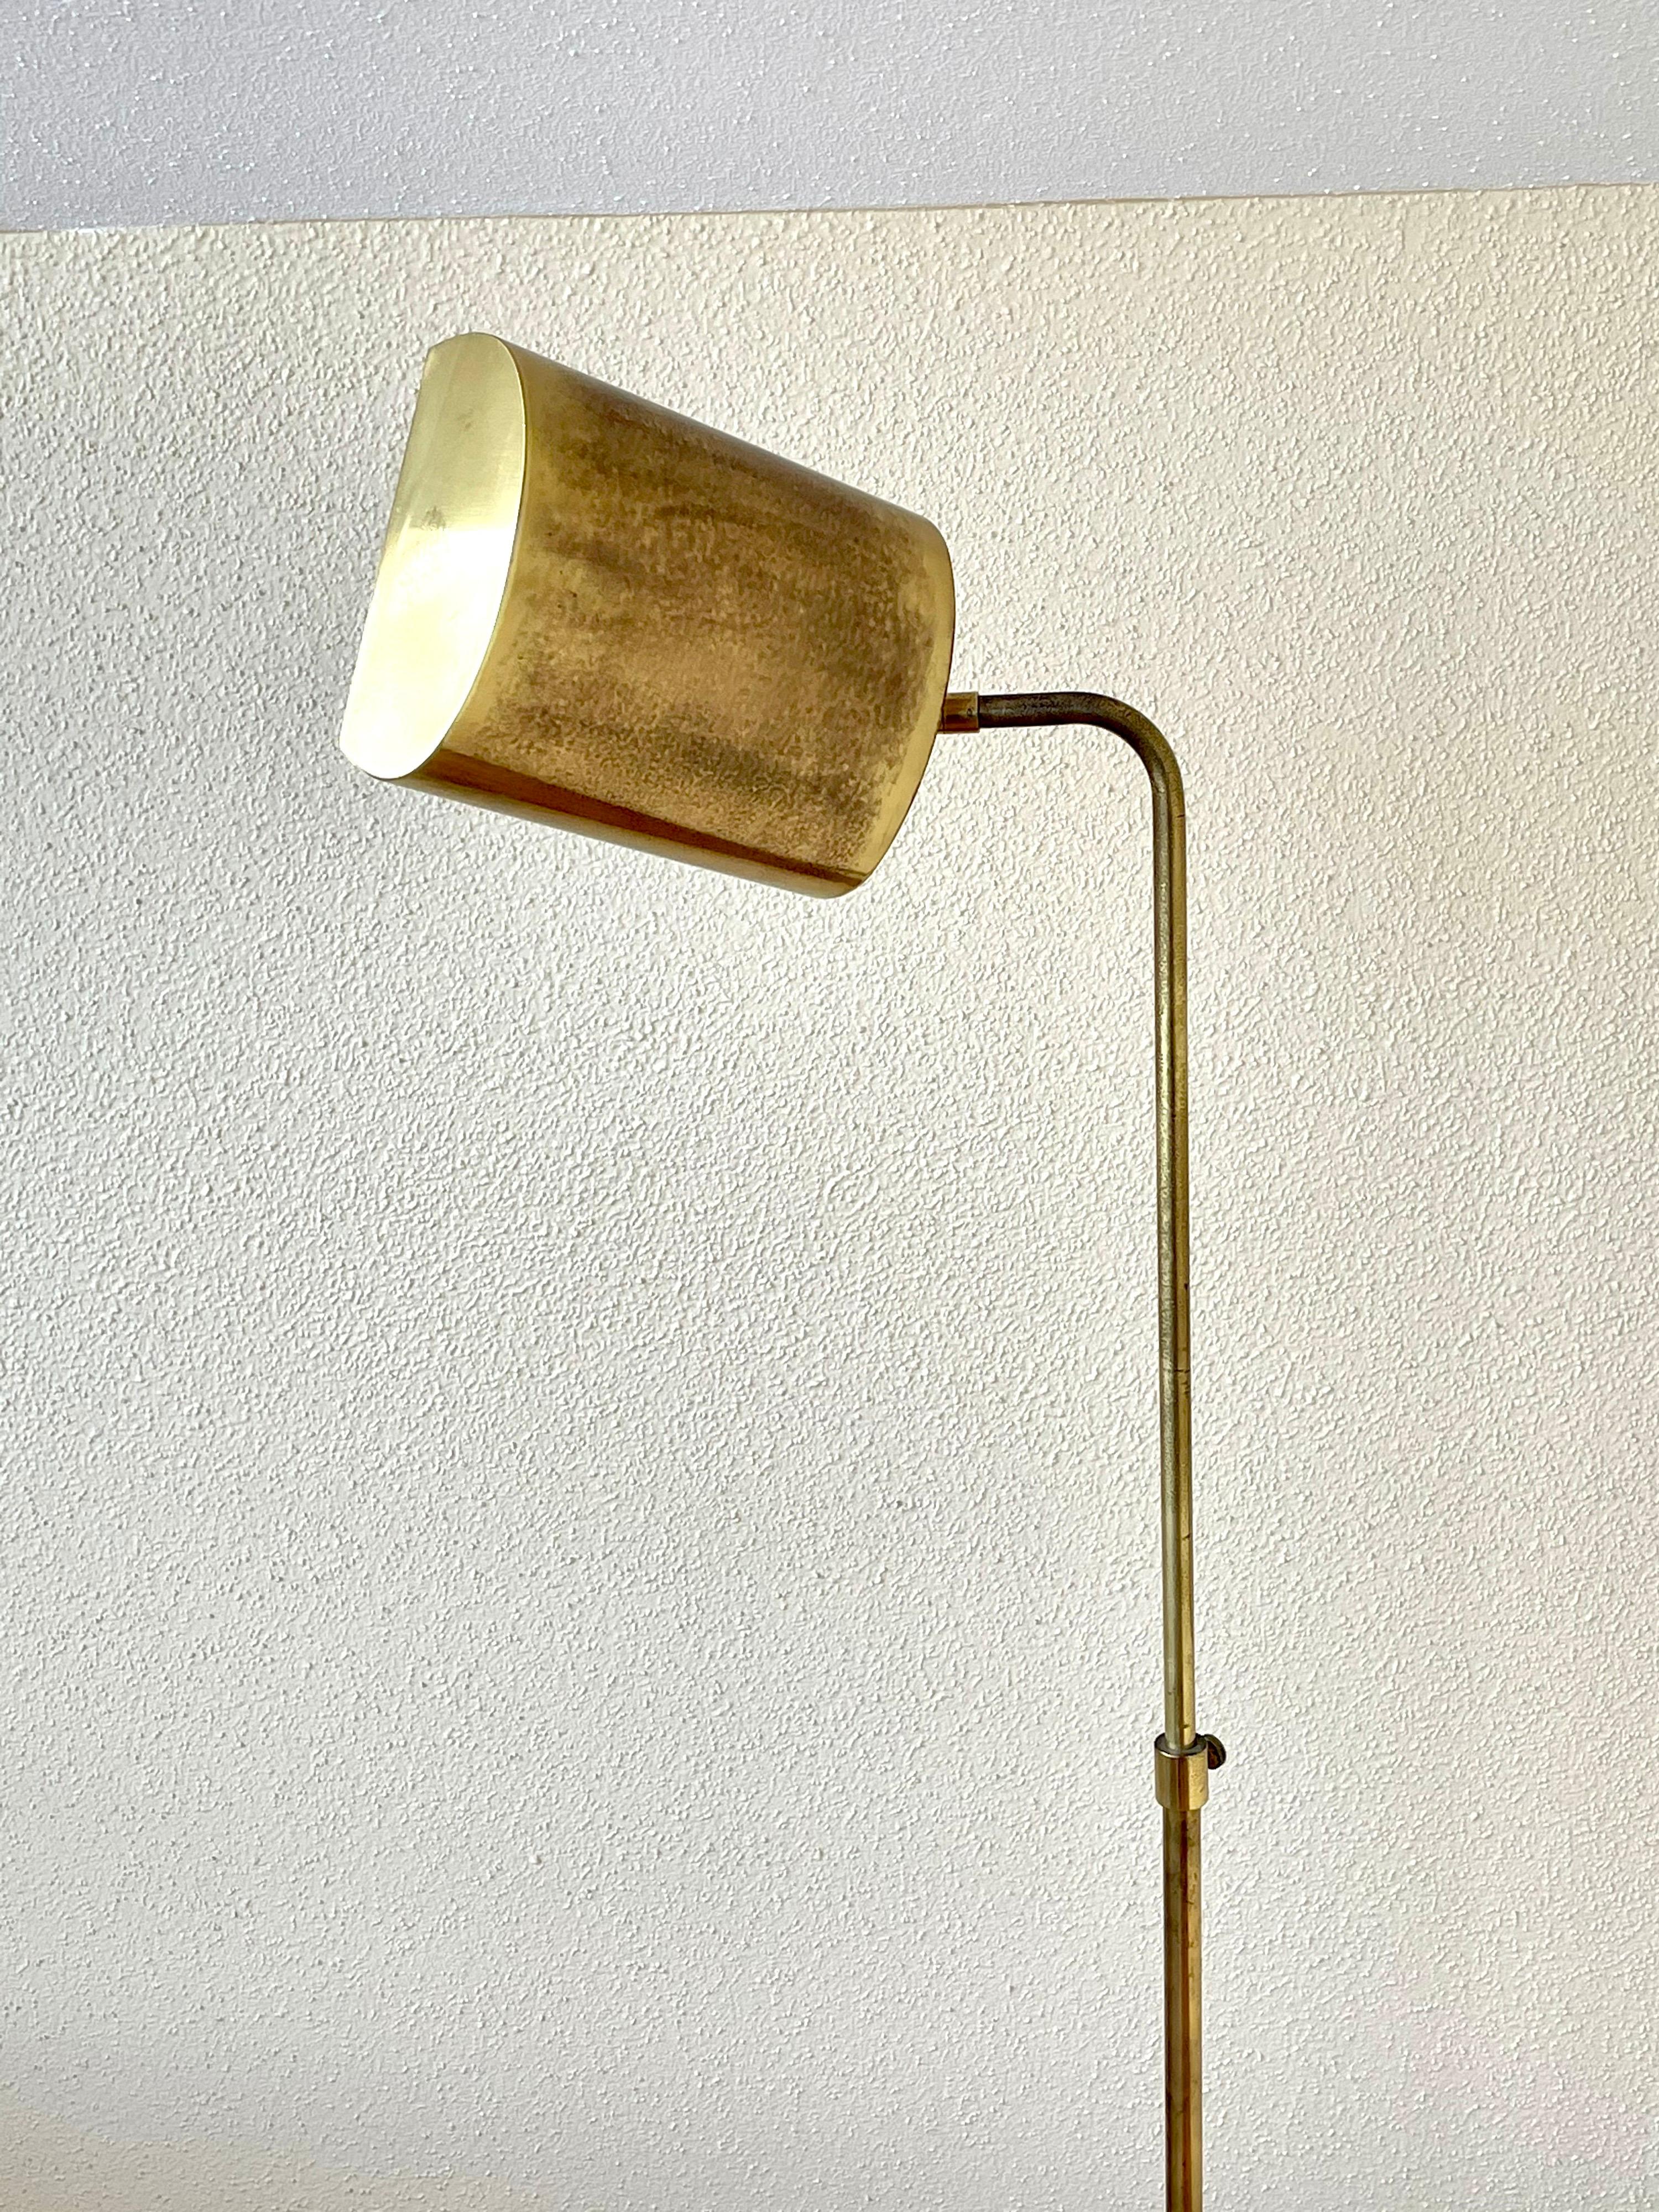 Great design circa 1980s with that Memphis look, in patinated brass finish, that can be polished if desired, the lamp goes up and down rotates to 360 degrees, and the shade moves up and down. with adjustable size.